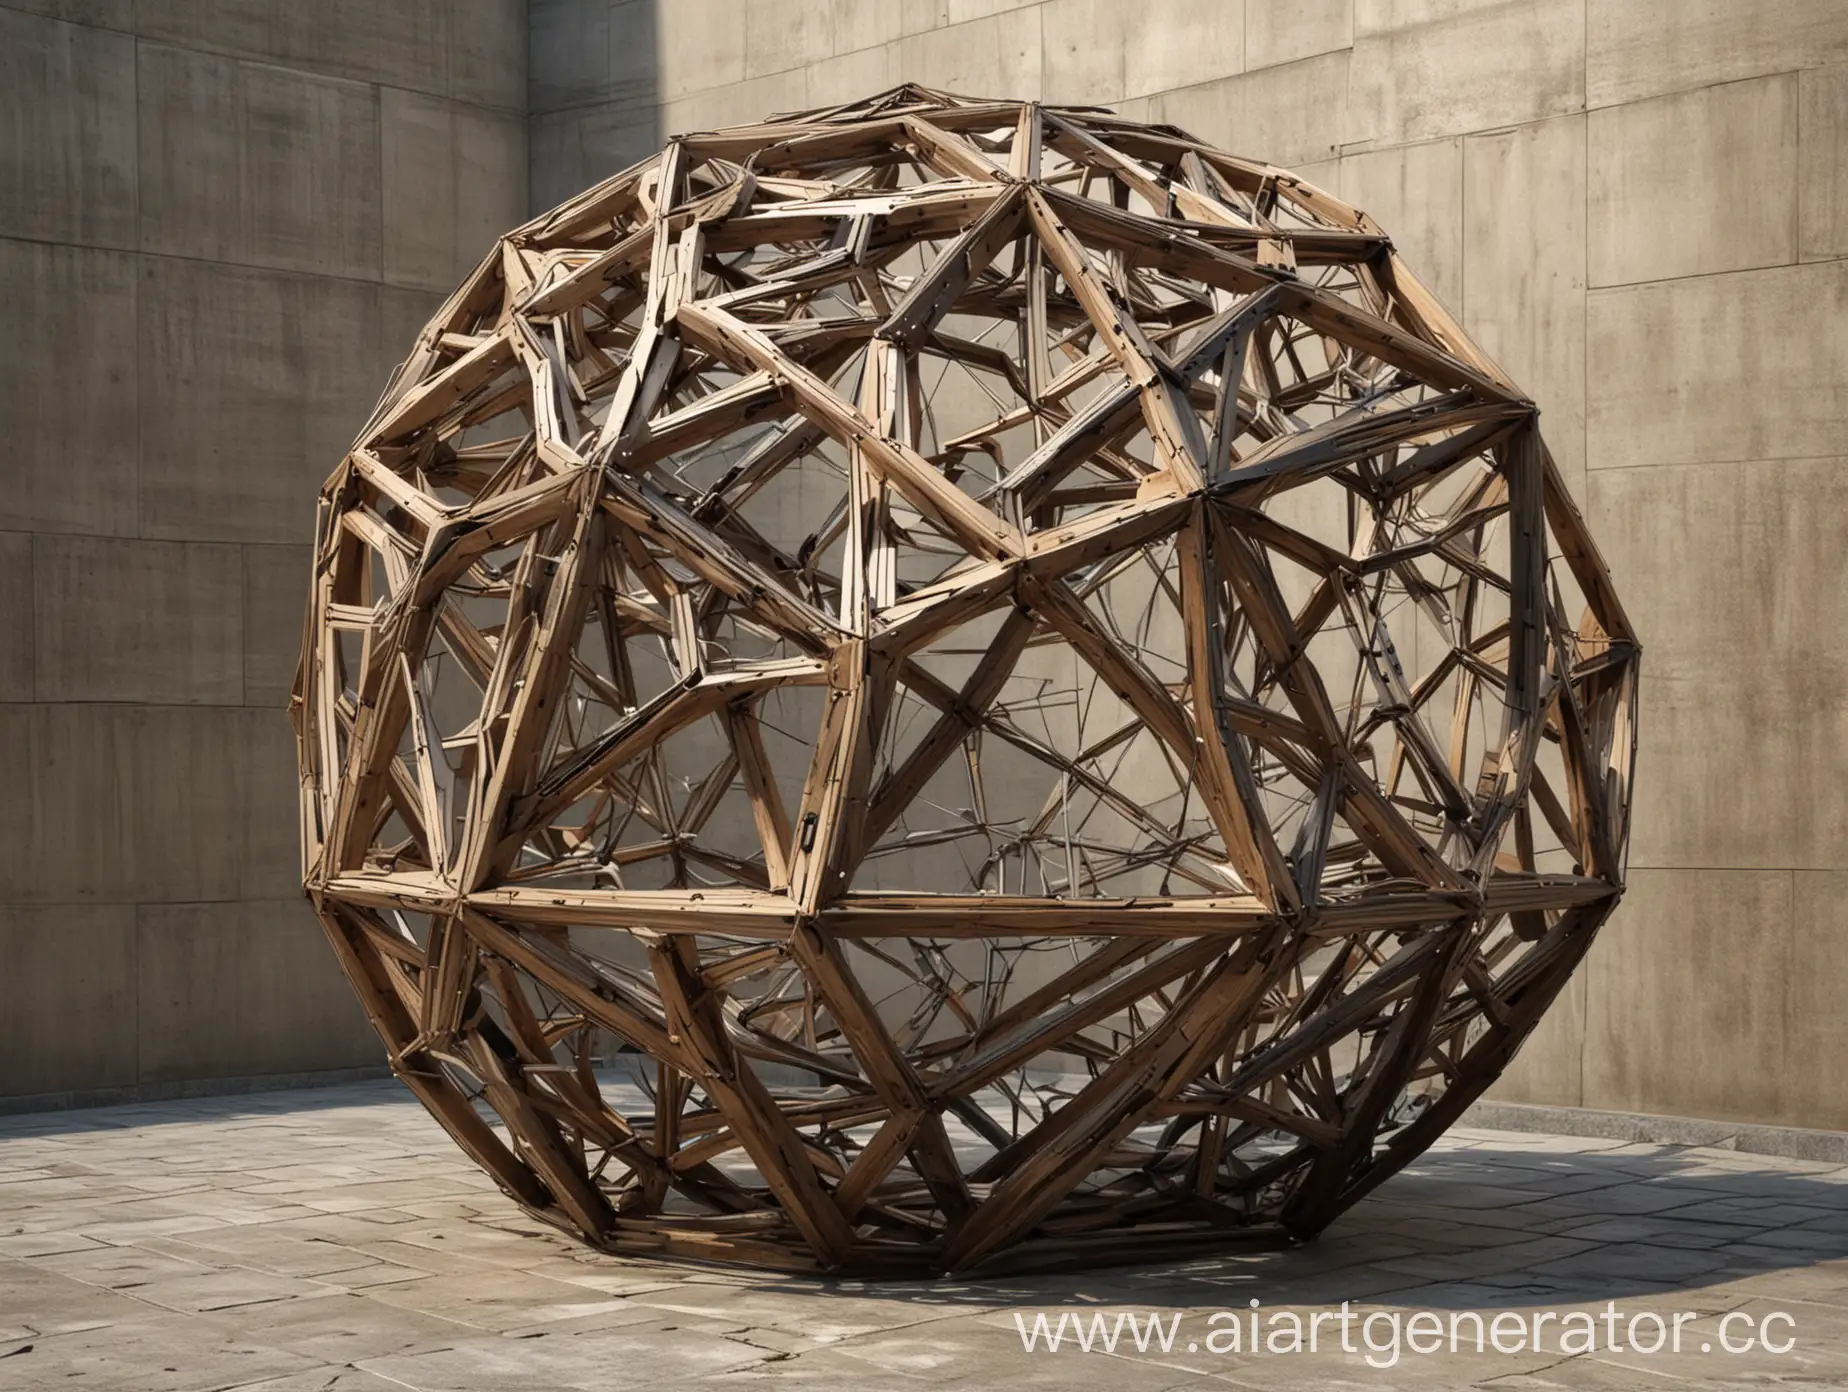 Architectural-Design-with-Polyhedral-Geometry-Modern-Applications